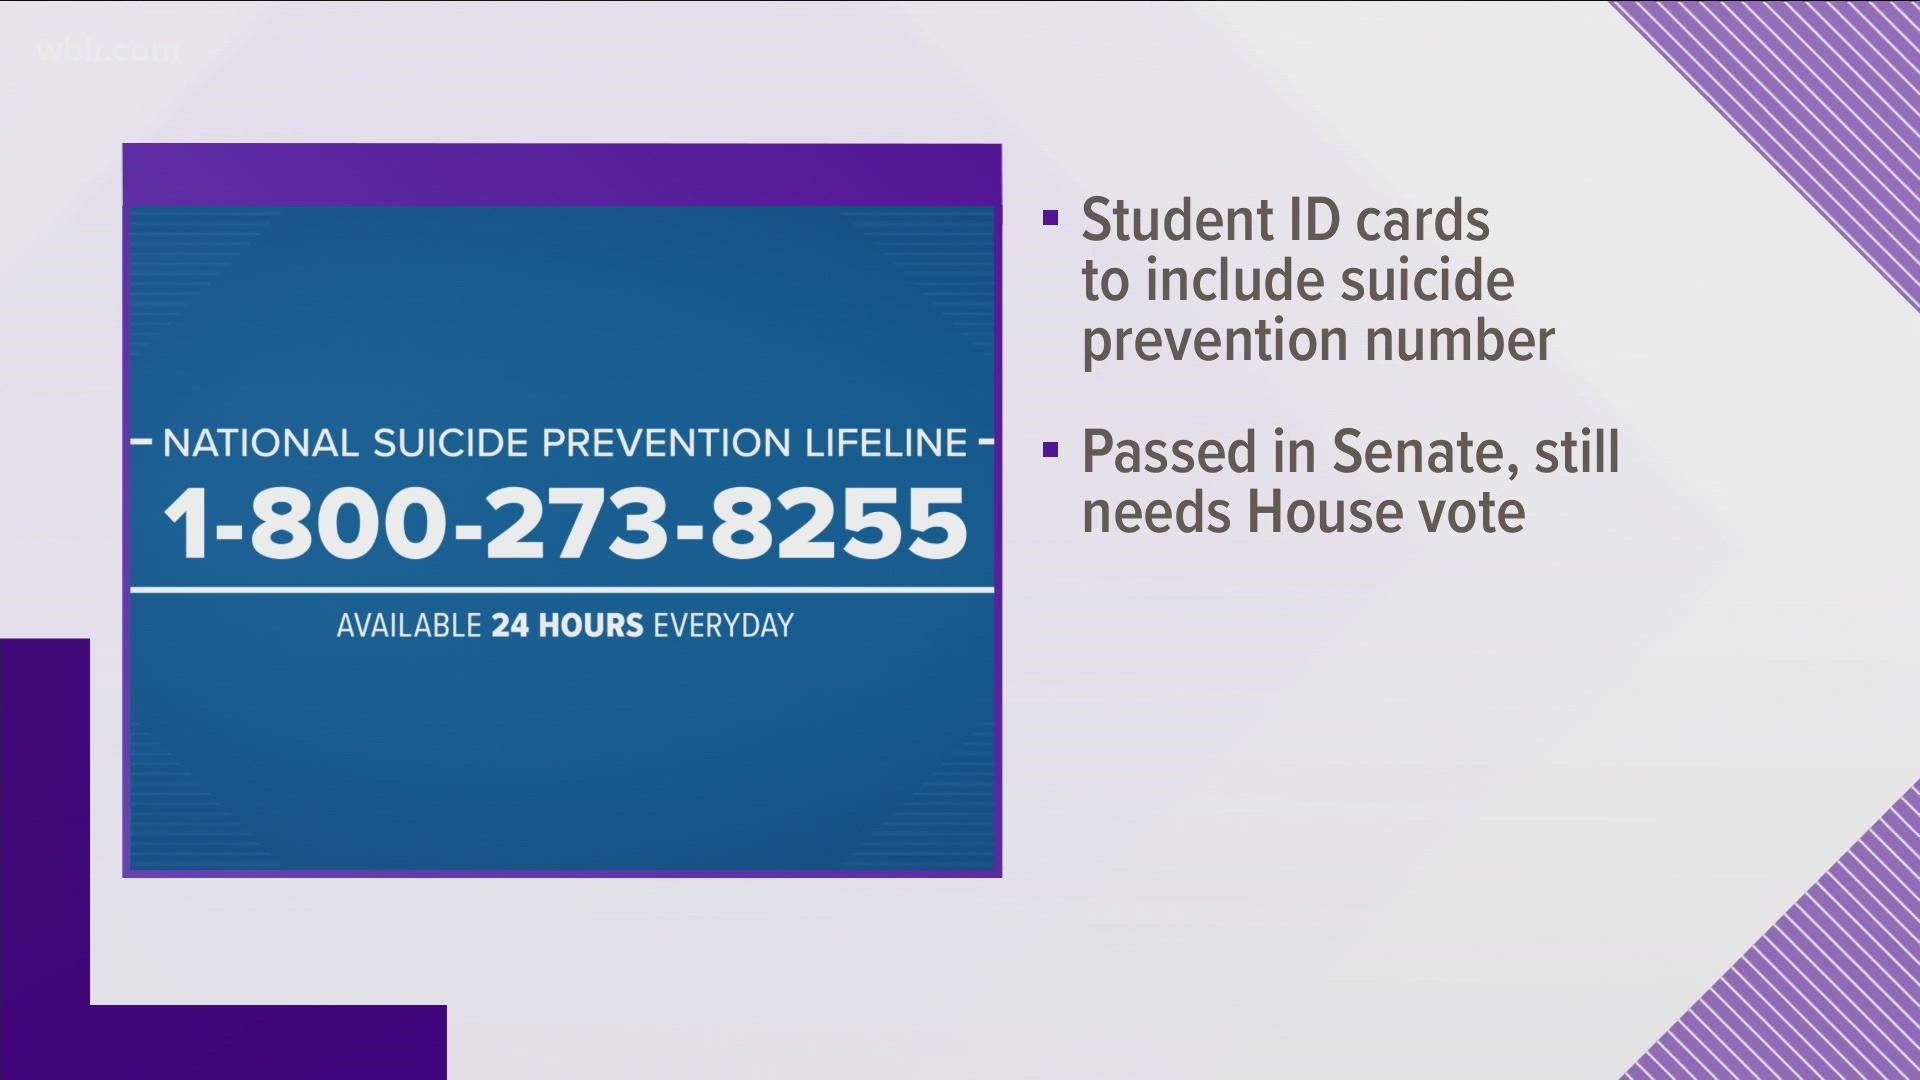 The bill would require districts to include the number for the National Suicide Prevention Lifeline onto student IDs.